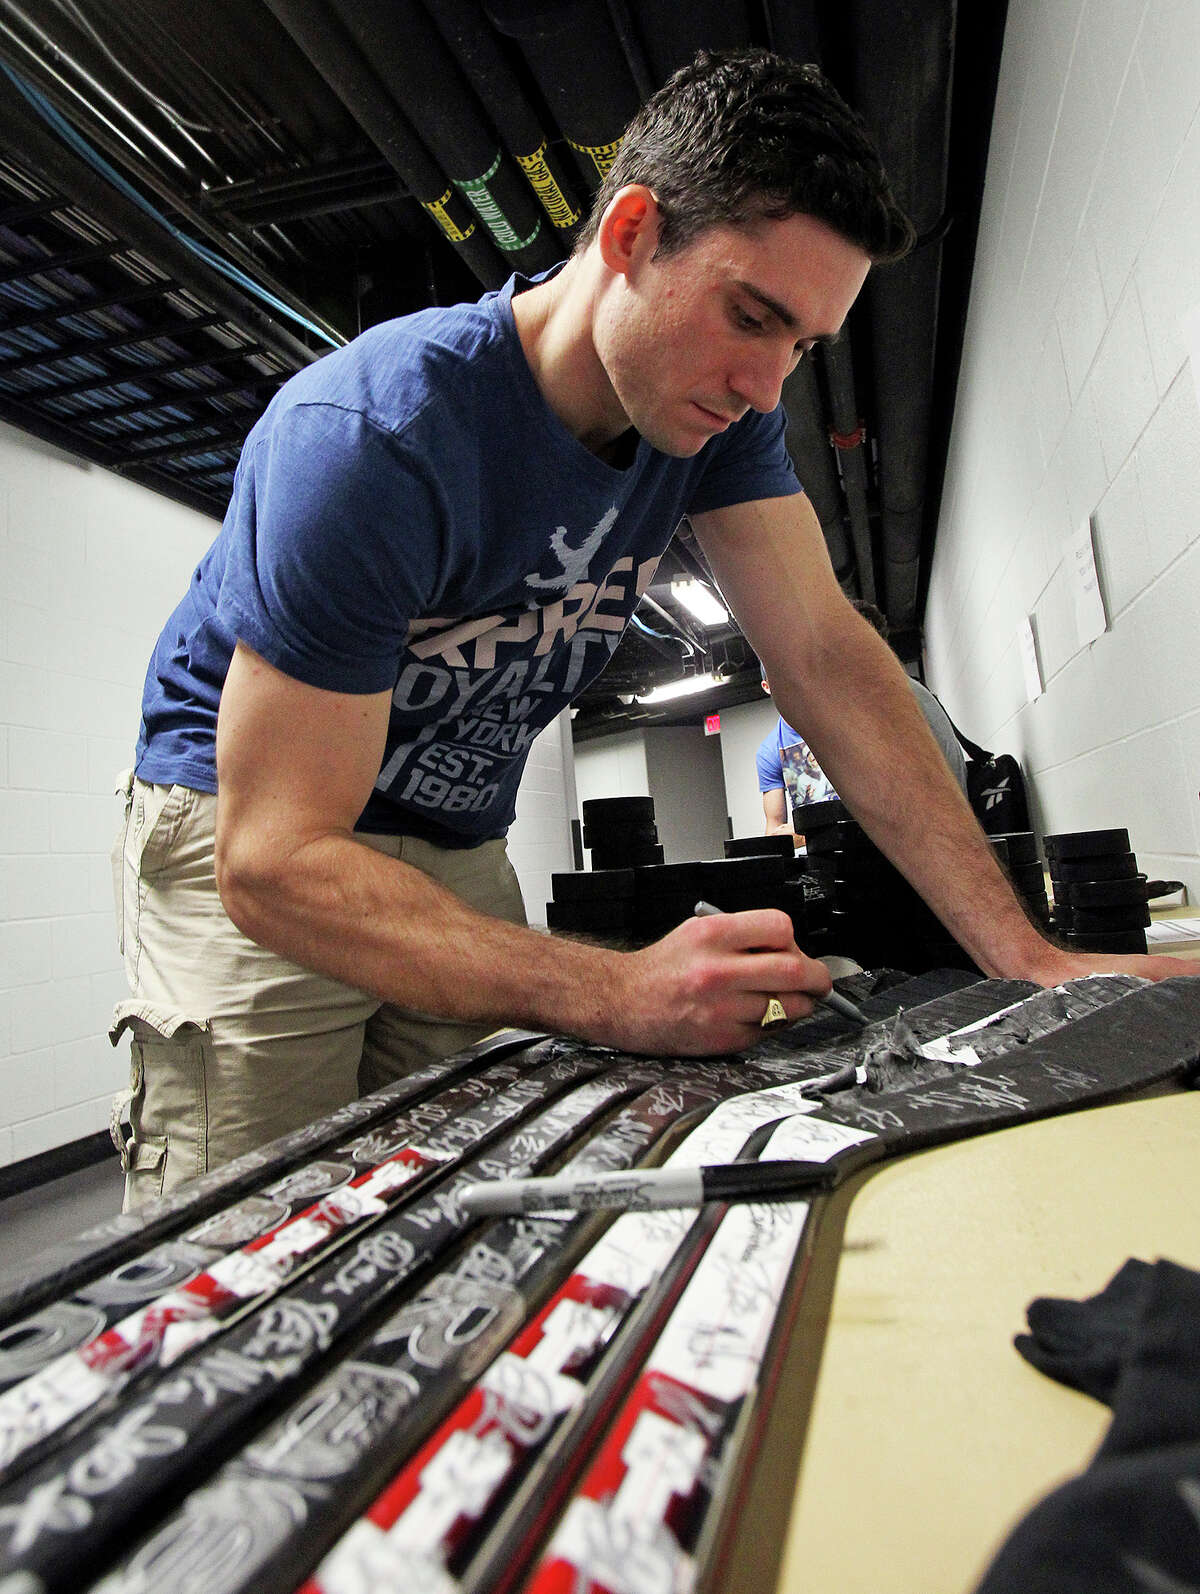 Dov Grumet-Morris autographs hockey sticks as the Rampage hockey team conducts media day at the AT&T Center on October 1, 2013